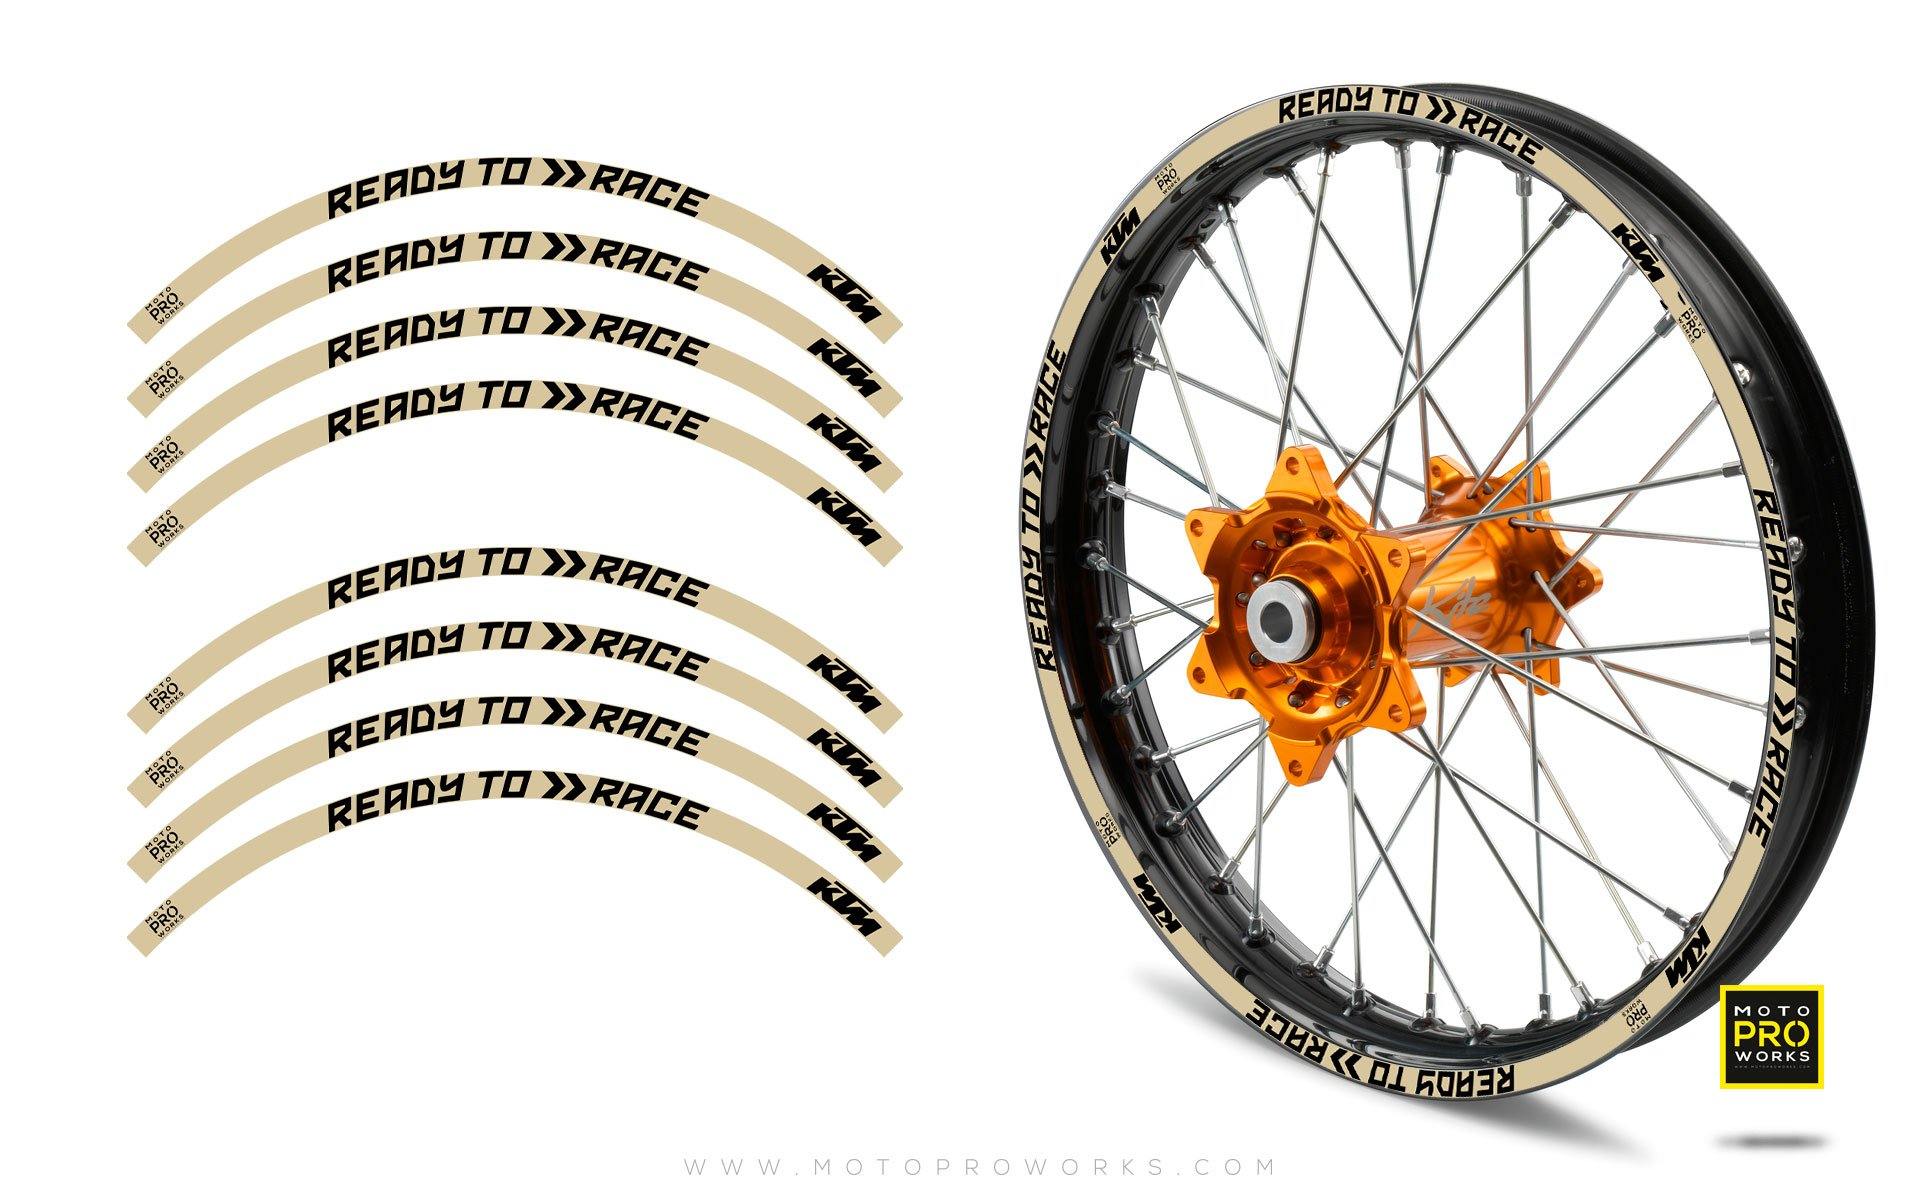 Rim Stripes - KTM "Ready To Race" (Sand) - MotoProWorks | Decals and Bike Graphic kit